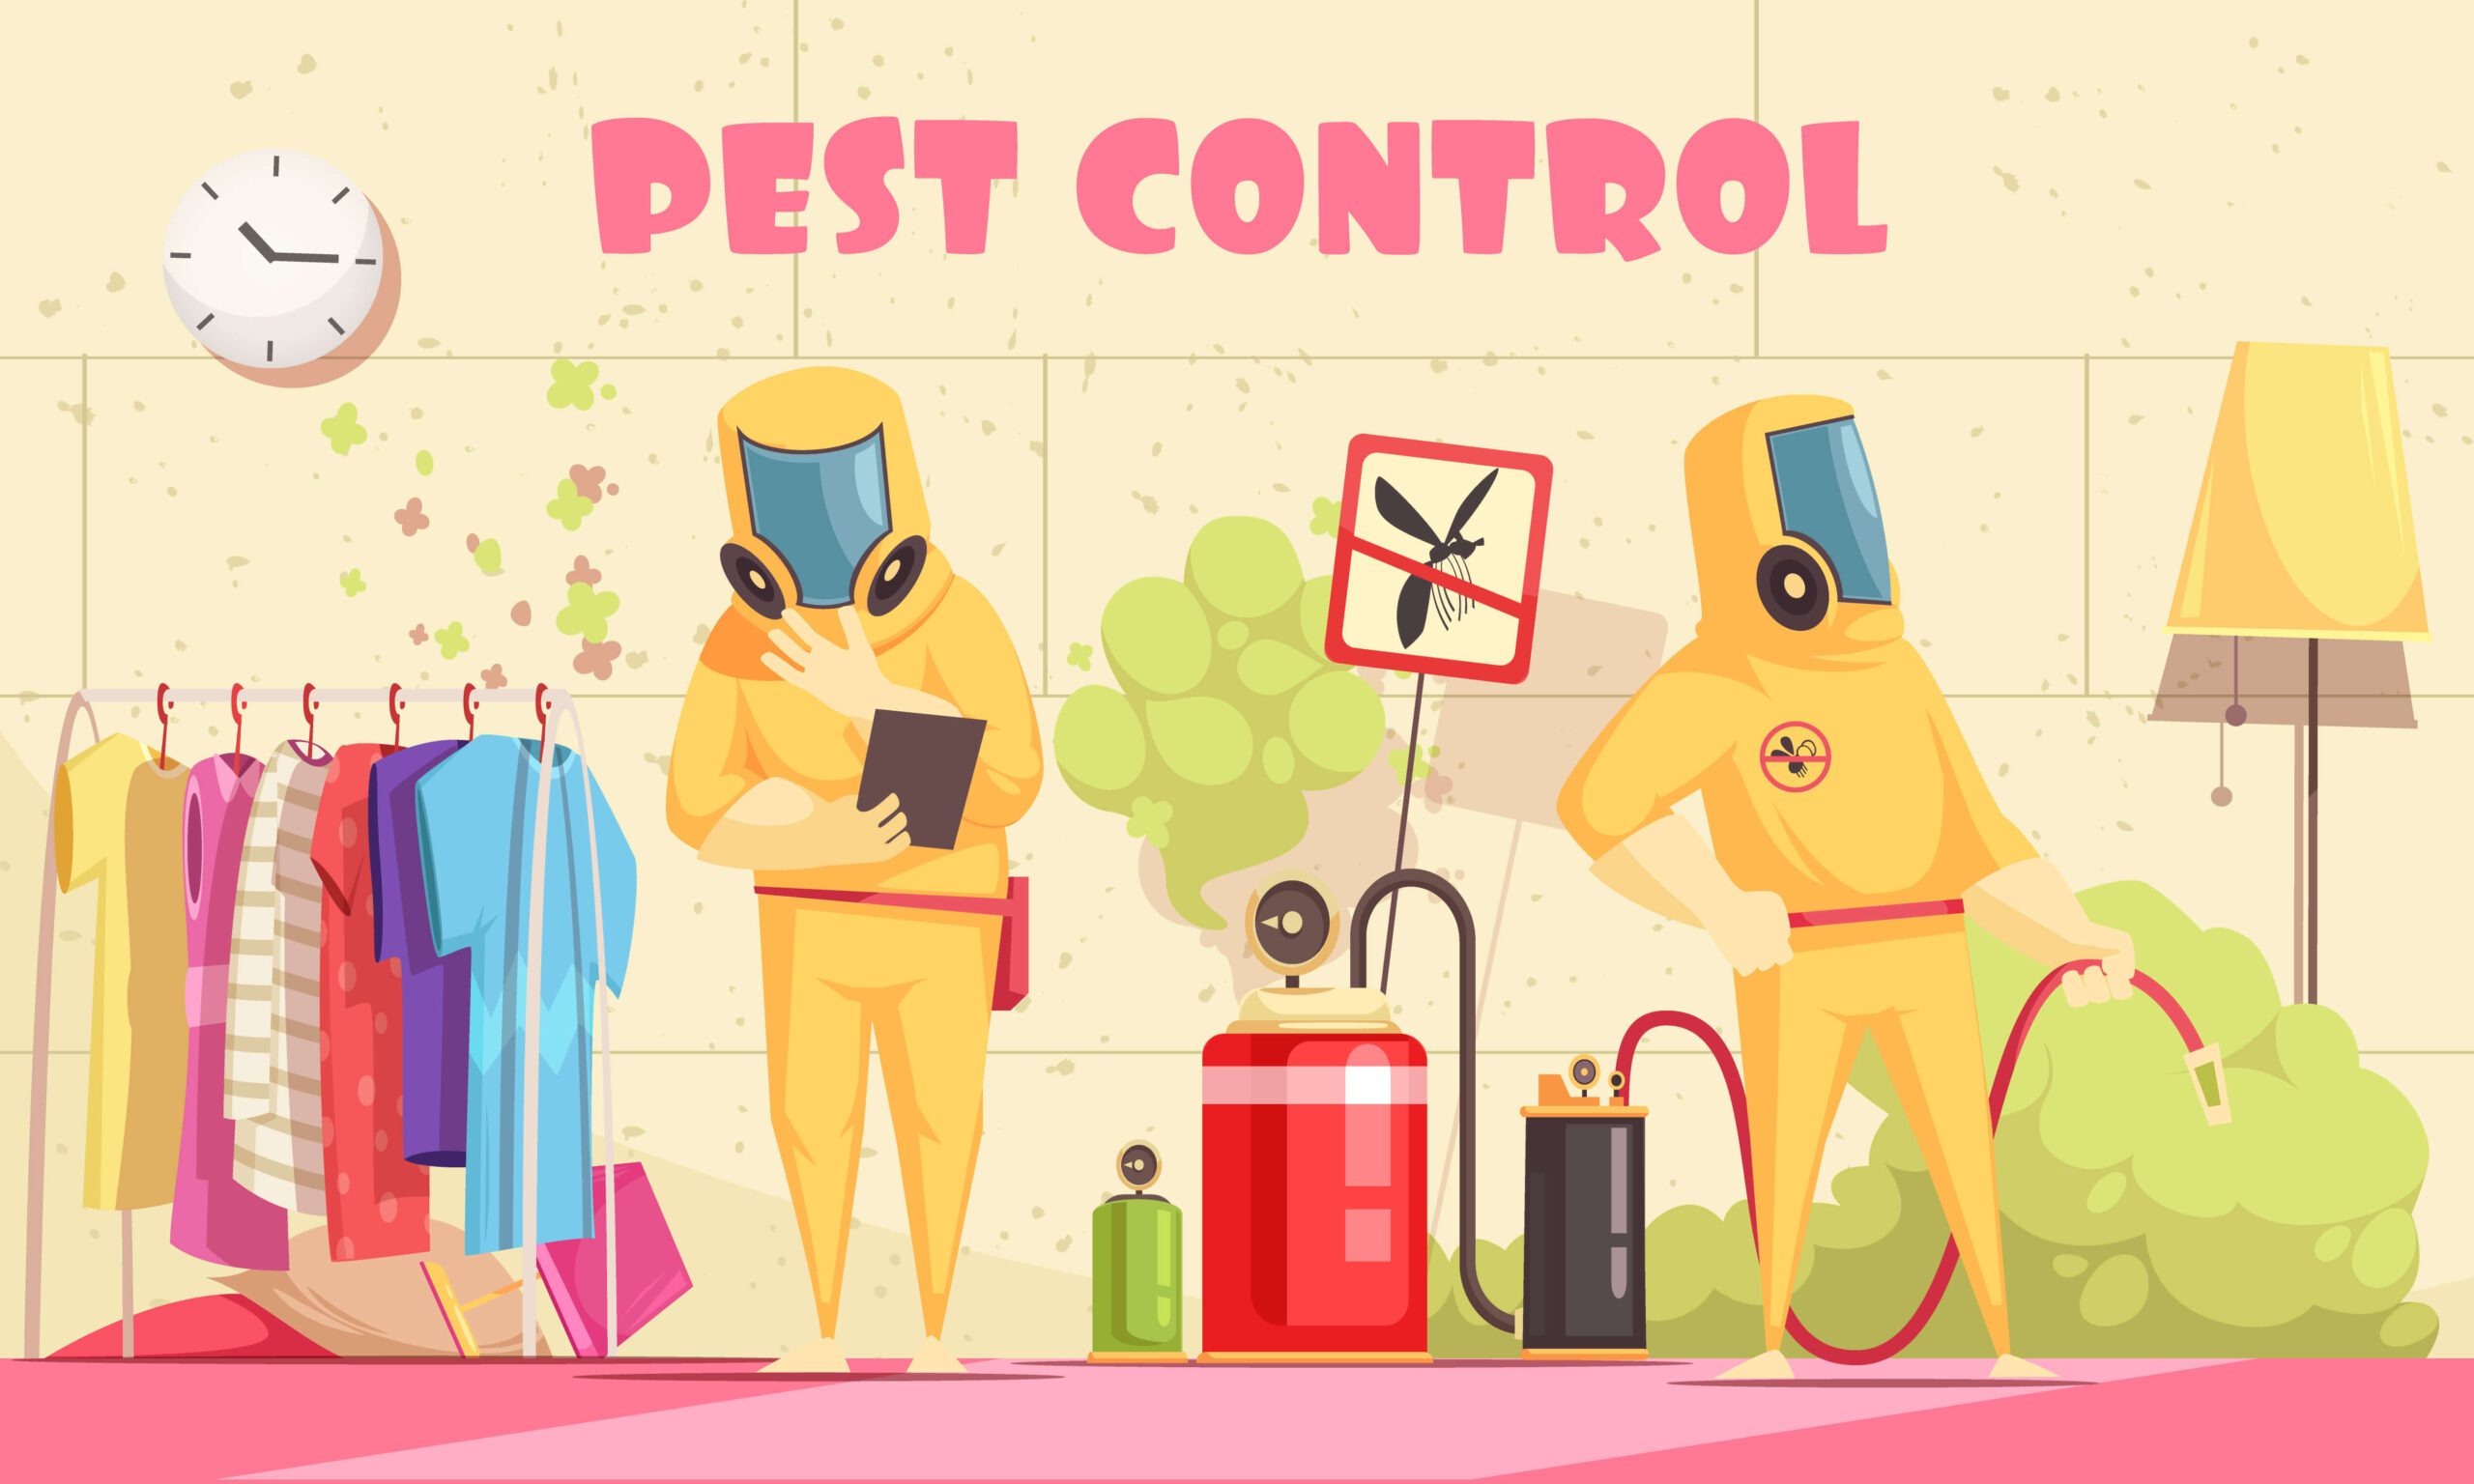 What Are The Advantages And Disadvantages of Pest Control